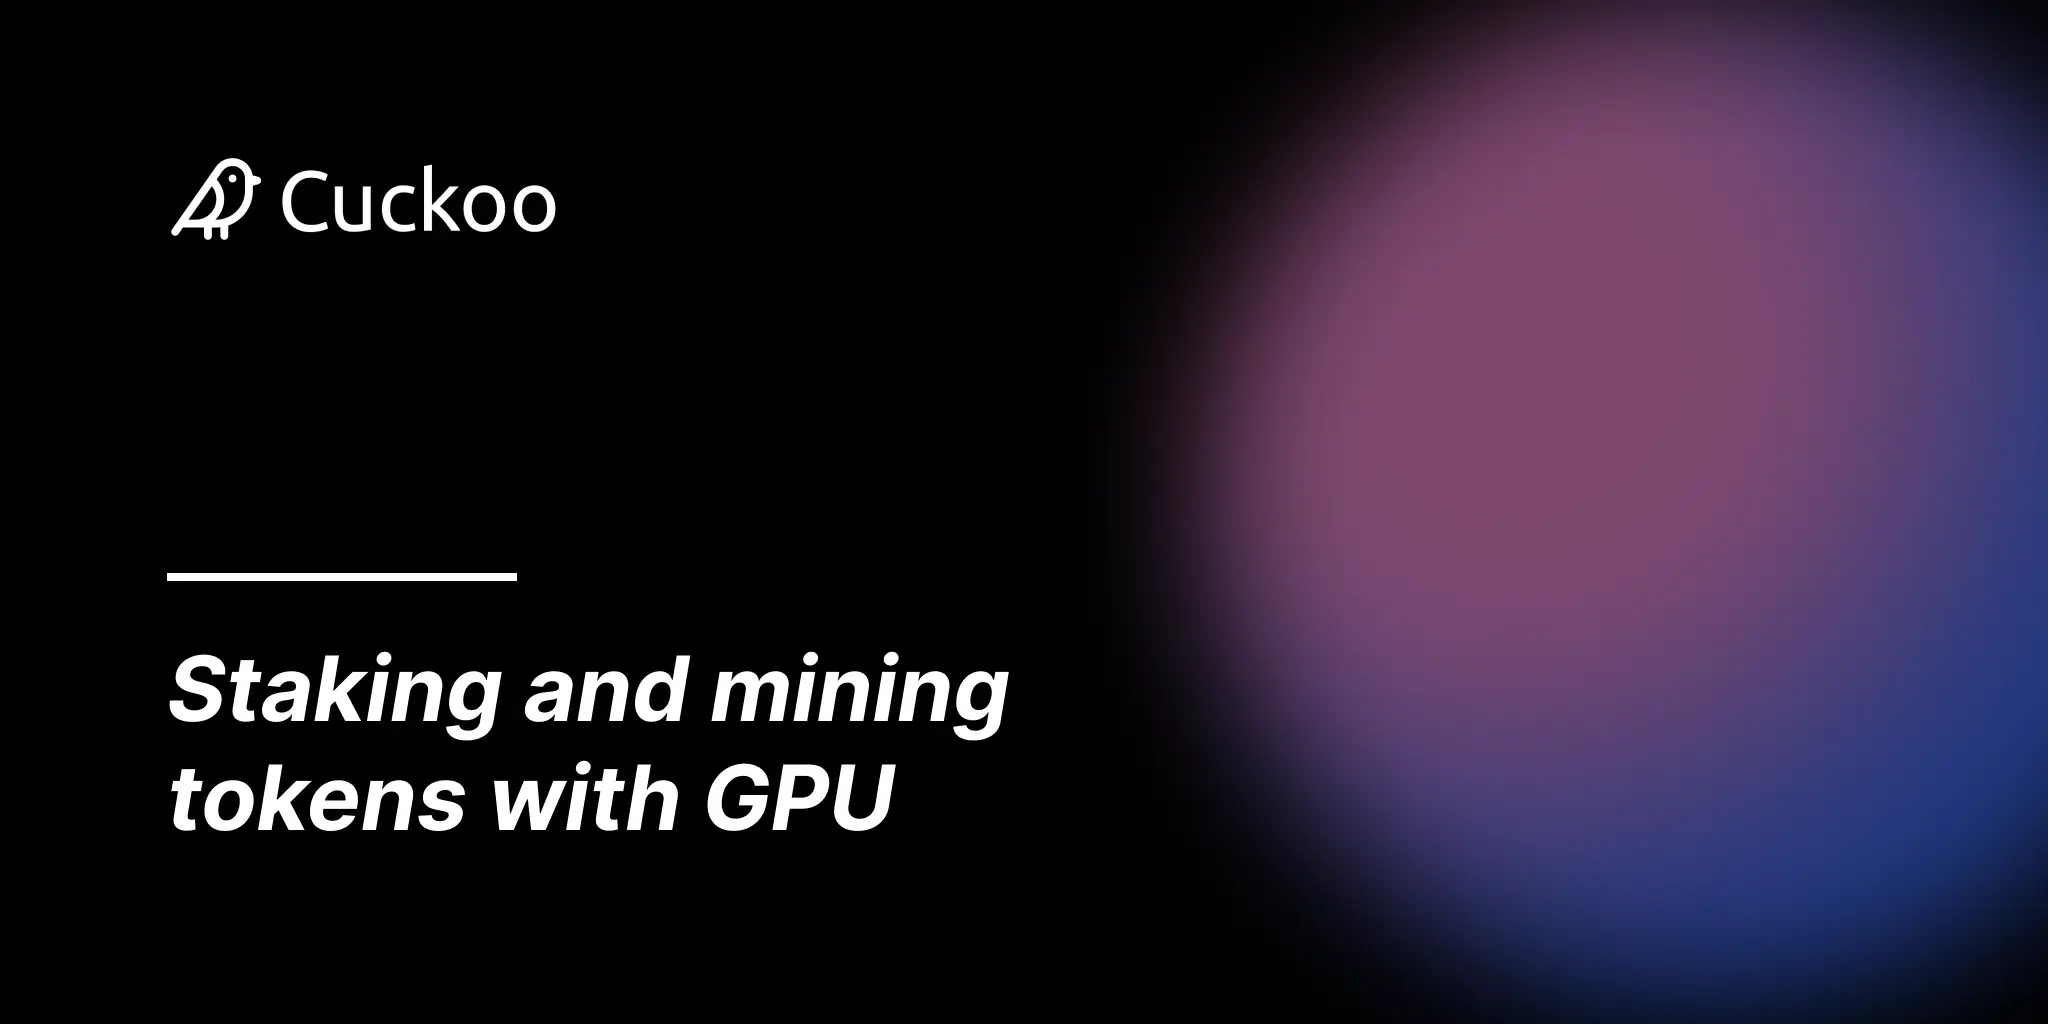 Staking and mining tokens with GPU